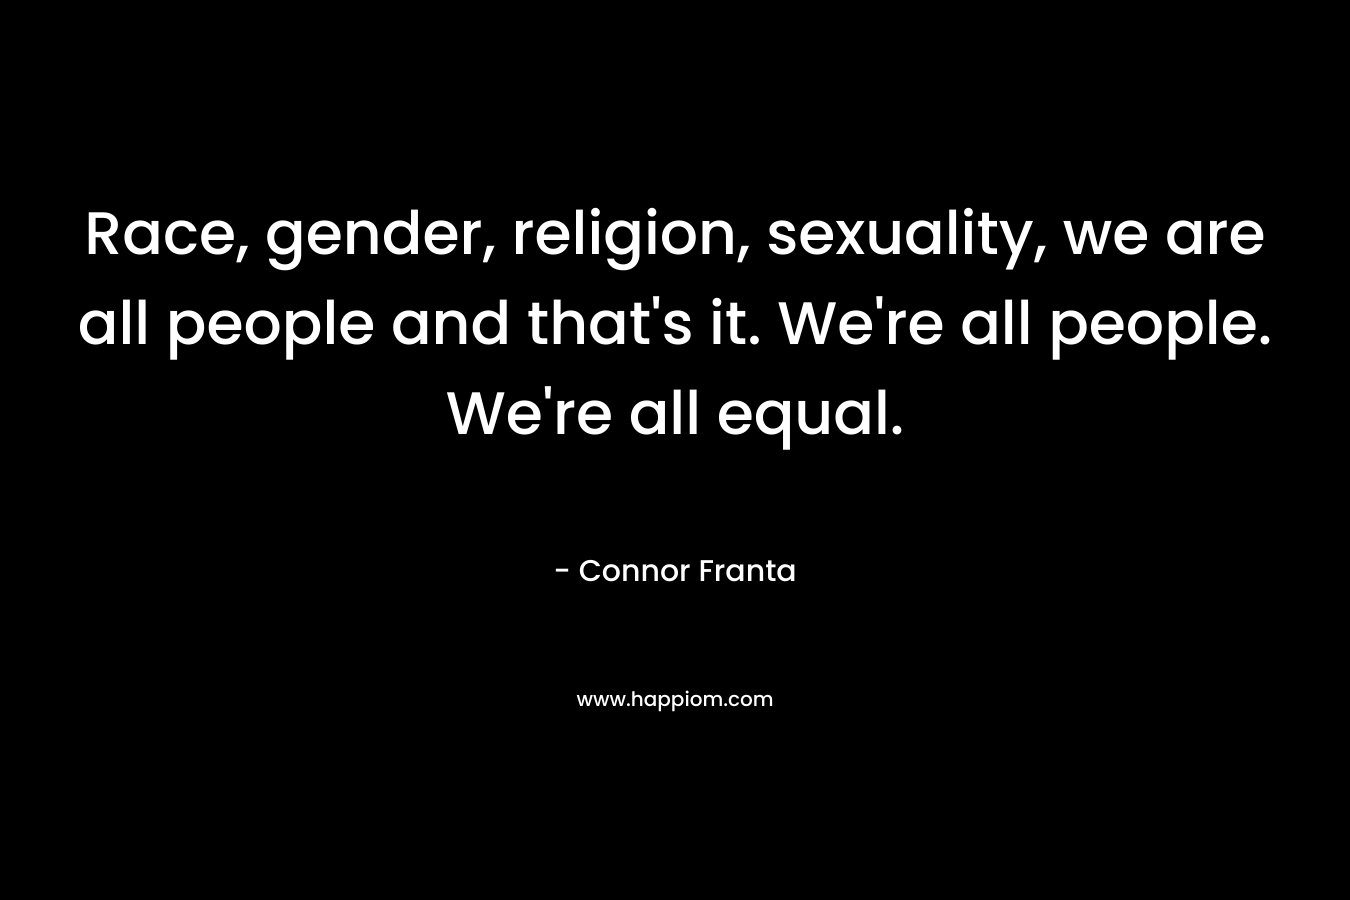 Race, gender, religion, sexuality, we are all people and that’s it. We’re all people. We’re all equal. – Connor Franta